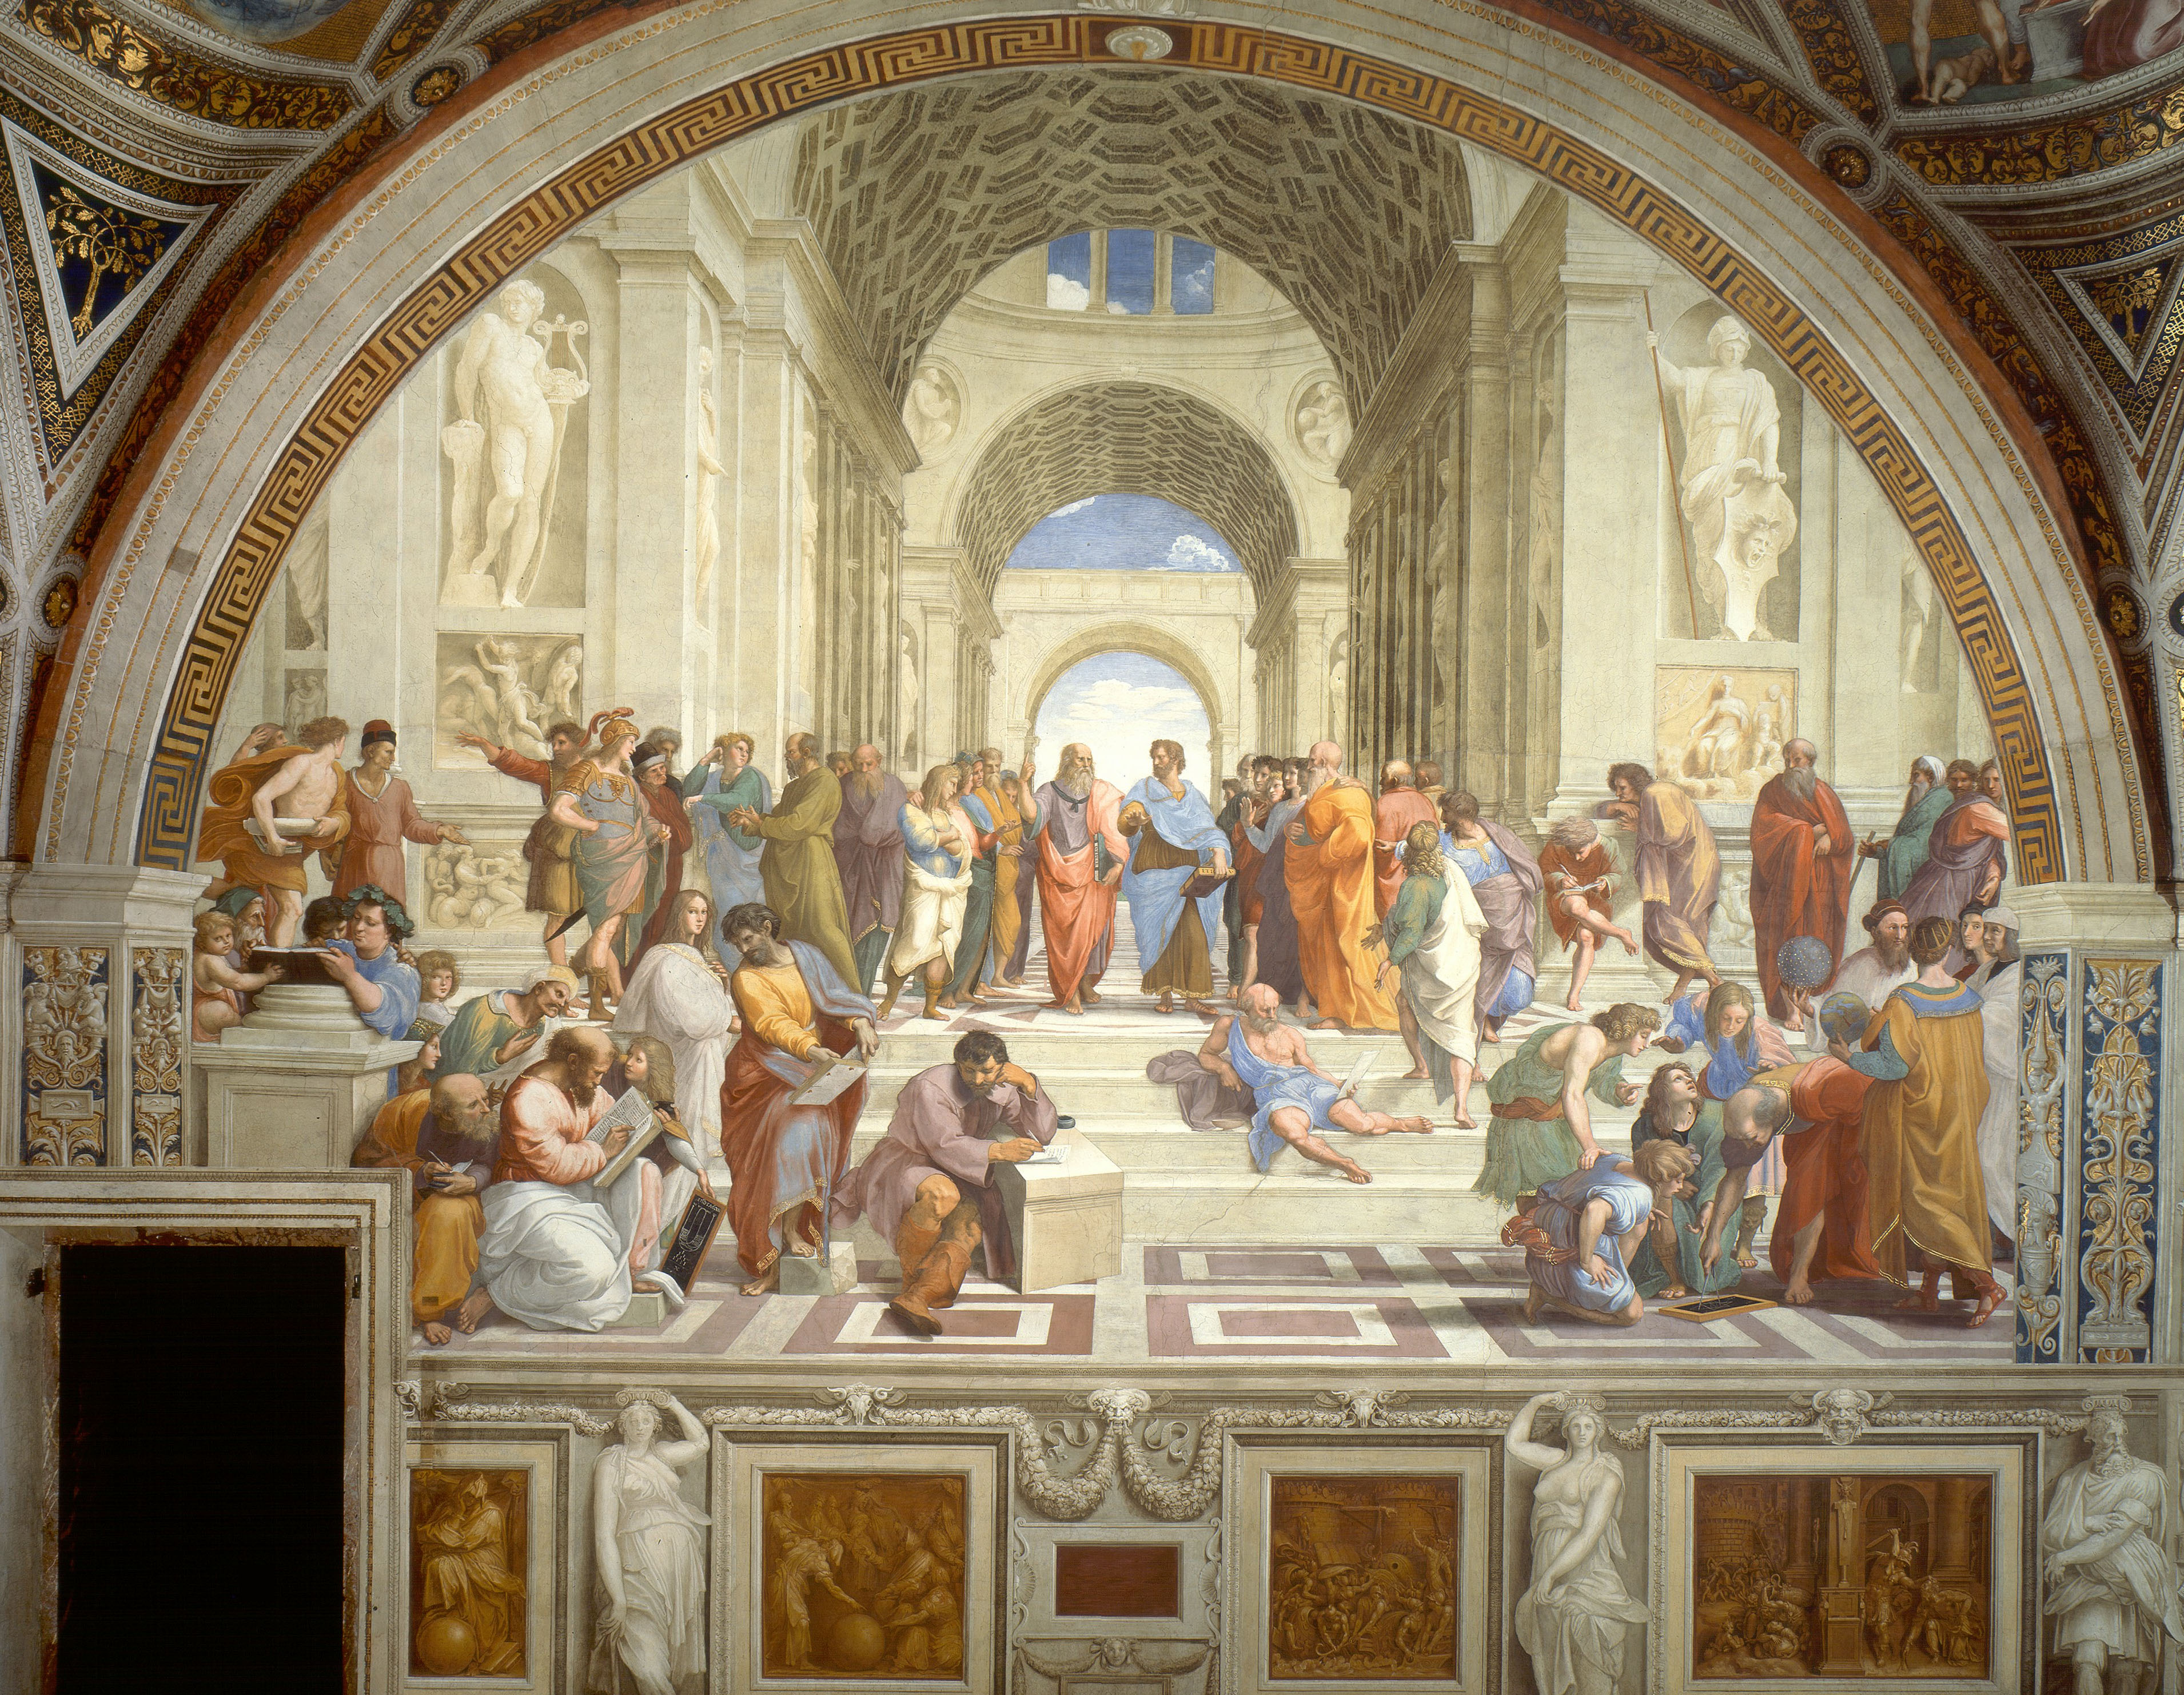 The School of Athens painted by Raphael in about 1509 typifies what the Renaissance was all about. The humanists looked back on ancient Greece and Rome as a time of cultural advancement and artistic achievement—and they wanted to bring the “light” of those times into their own age. With the ancient Greek philosophers Plato and Aristotle at the center of the action, the School of Athens pictures numerous philosophers reading, writing, listening, and discussing. This demonstrates some key beliefs of the Renaissance humanists—that society should pursue knowledge and education, that ideas both old and new are worthwhile and exciting, and that public debate is important.  (Image via Wikipedia) 